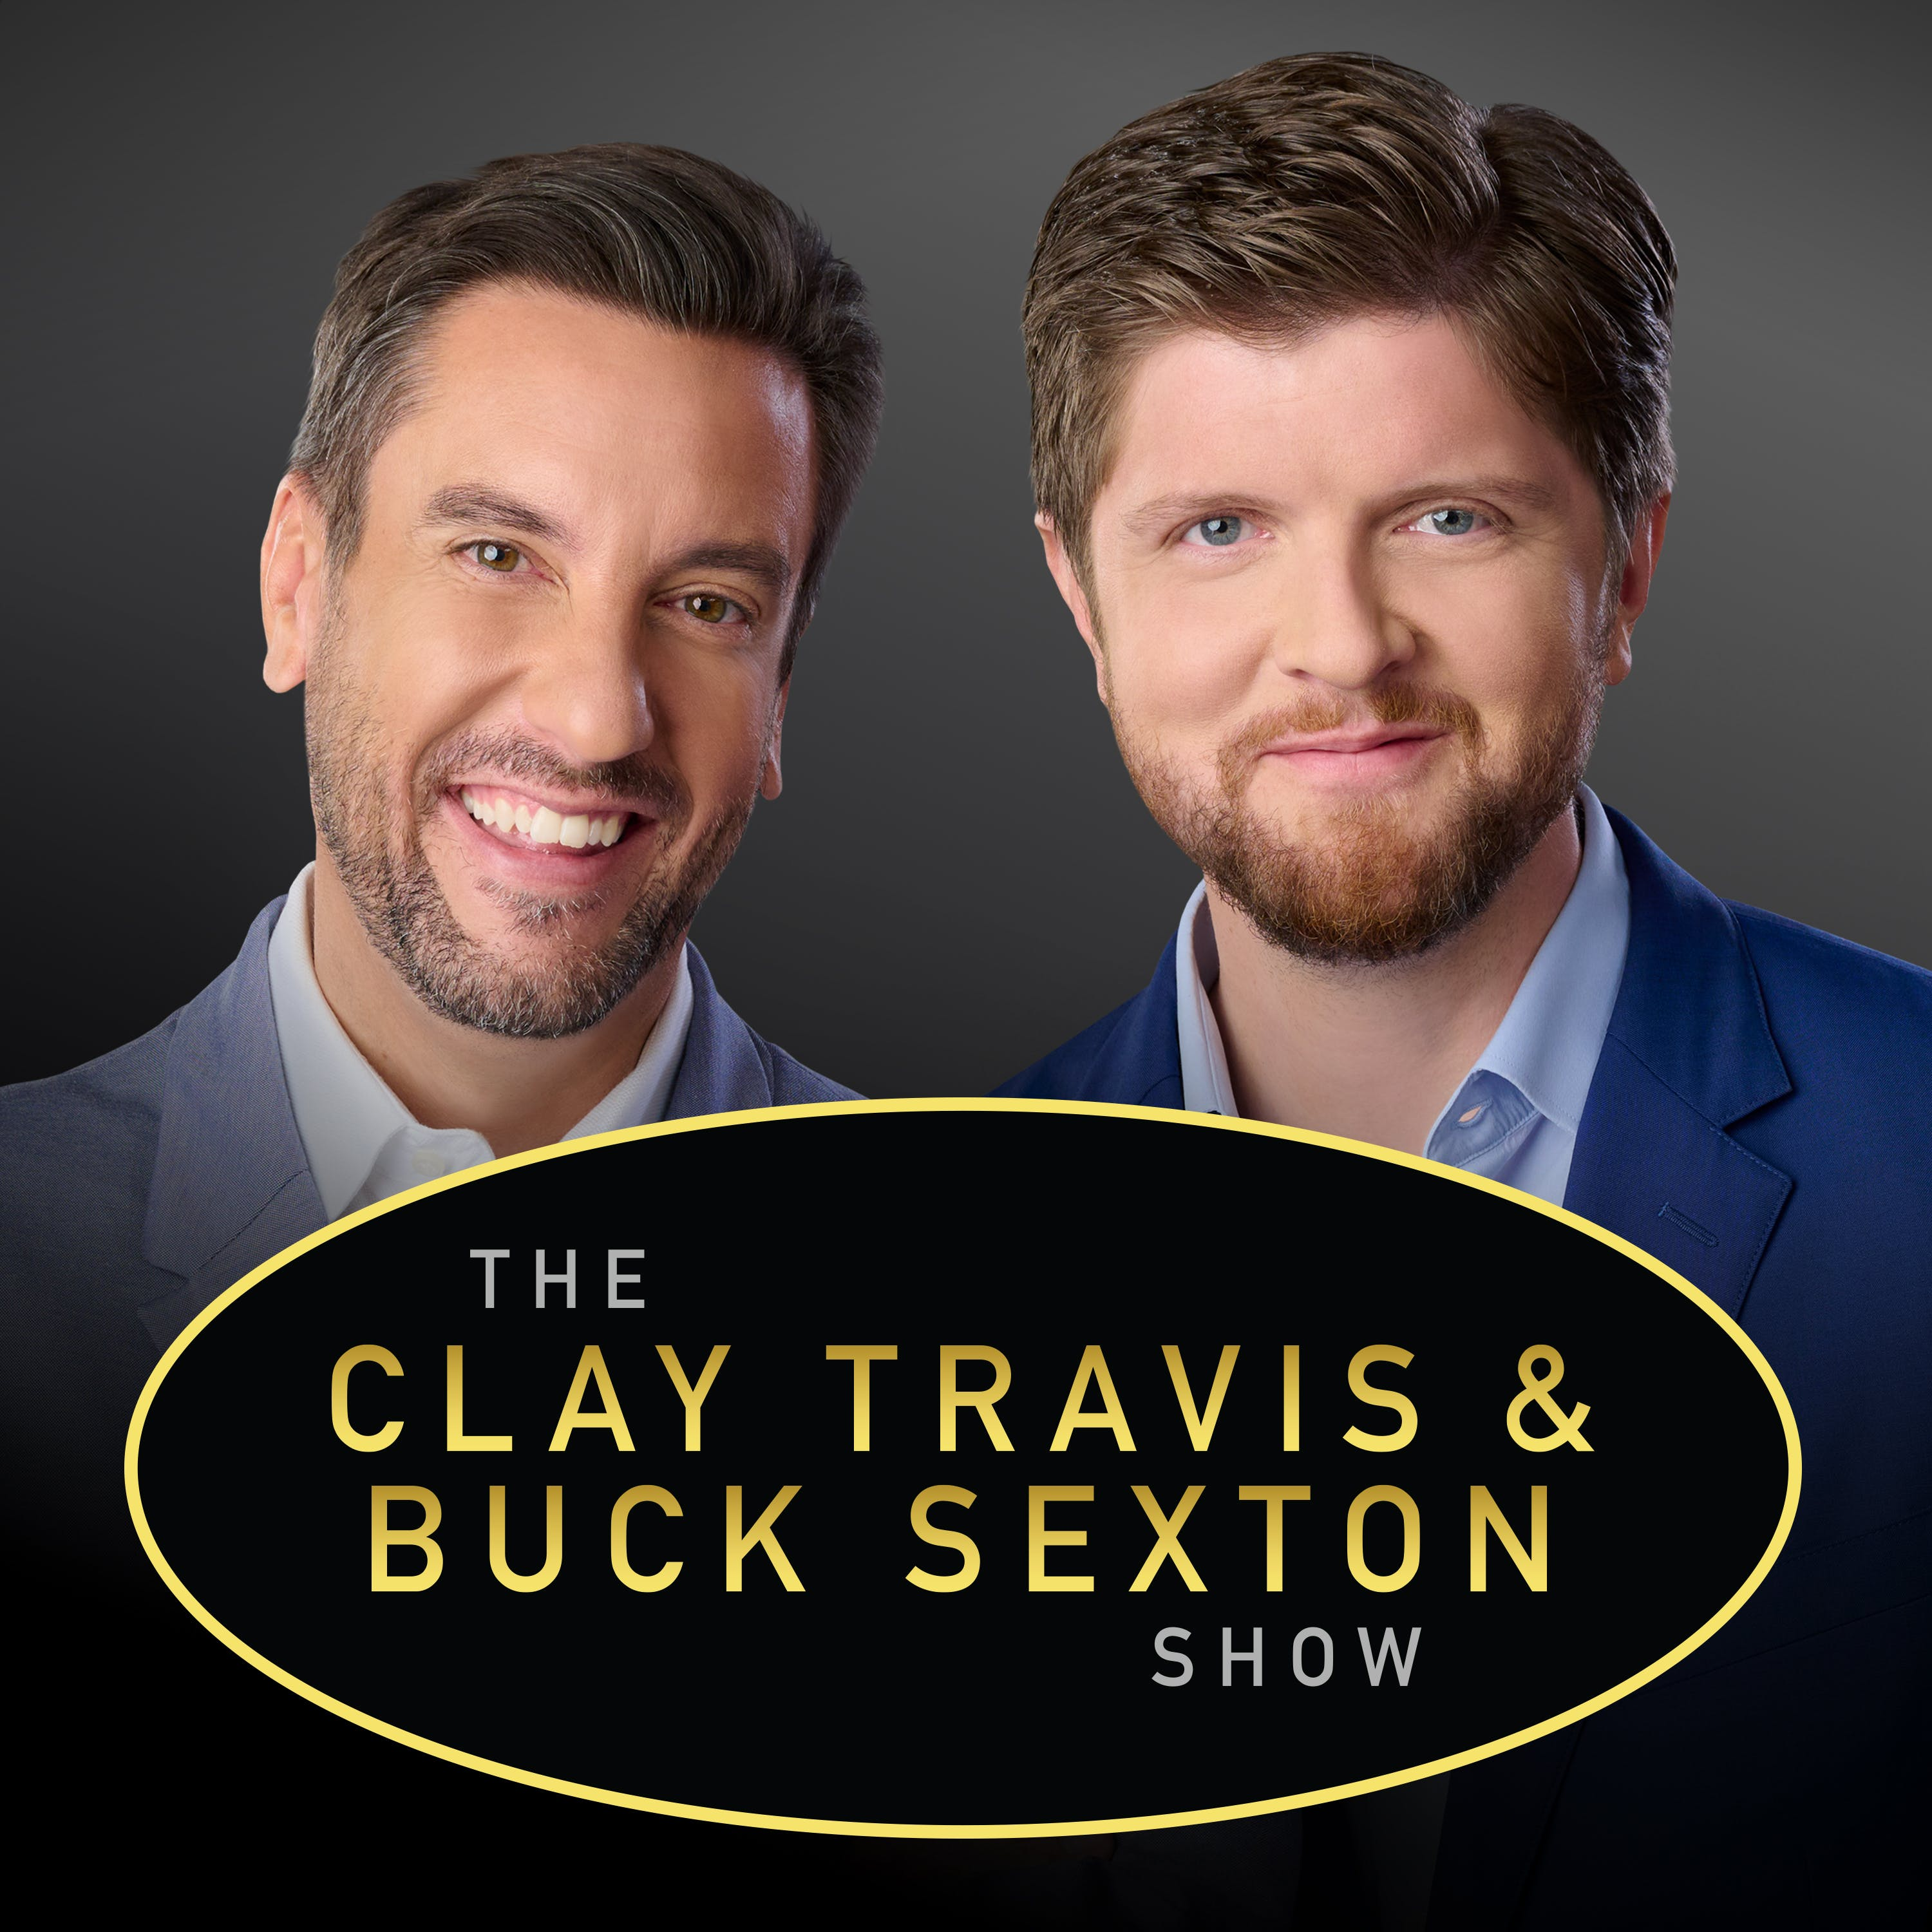 Clay Travis and Buck Sexton Show H1 – Oct 6 2021